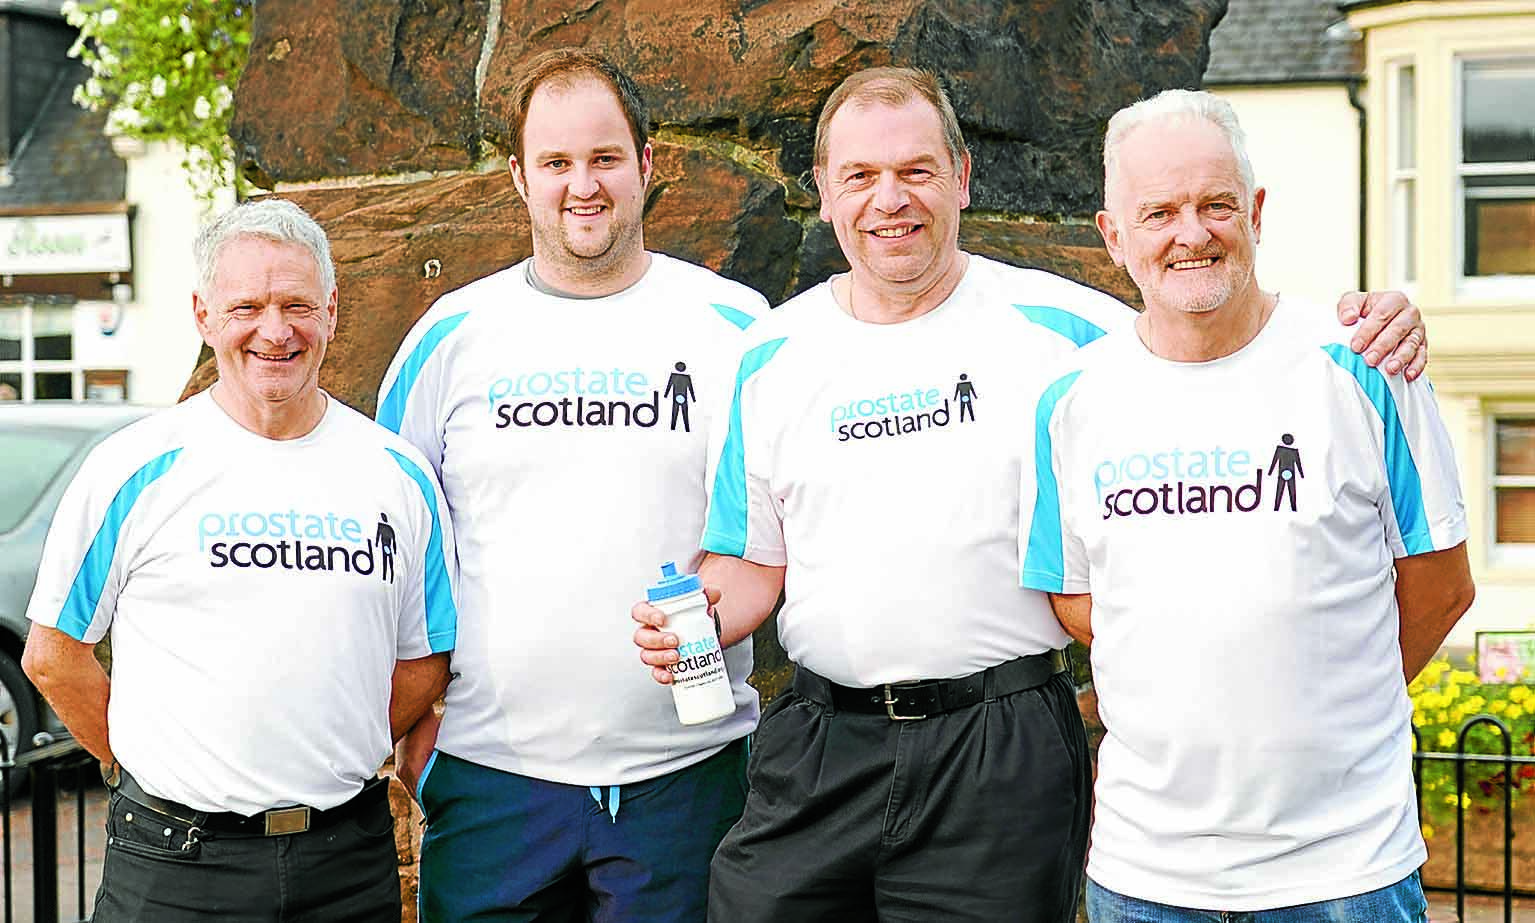 Friends are kilted up for charity walk